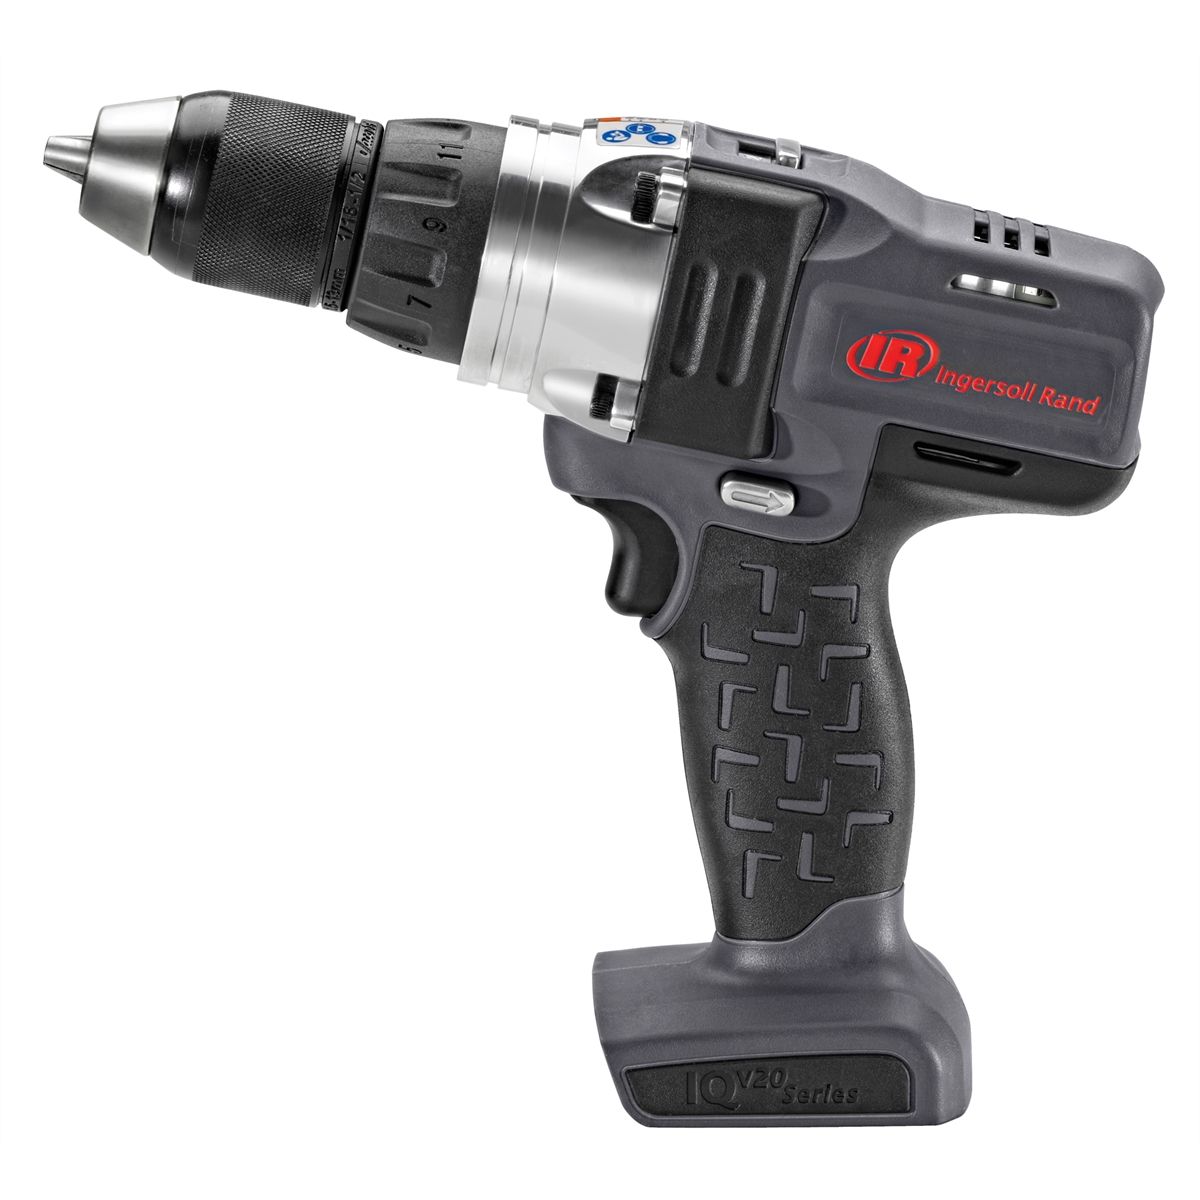 IQV20 1/2" Drive Cordless Drill - Bare Tool Only